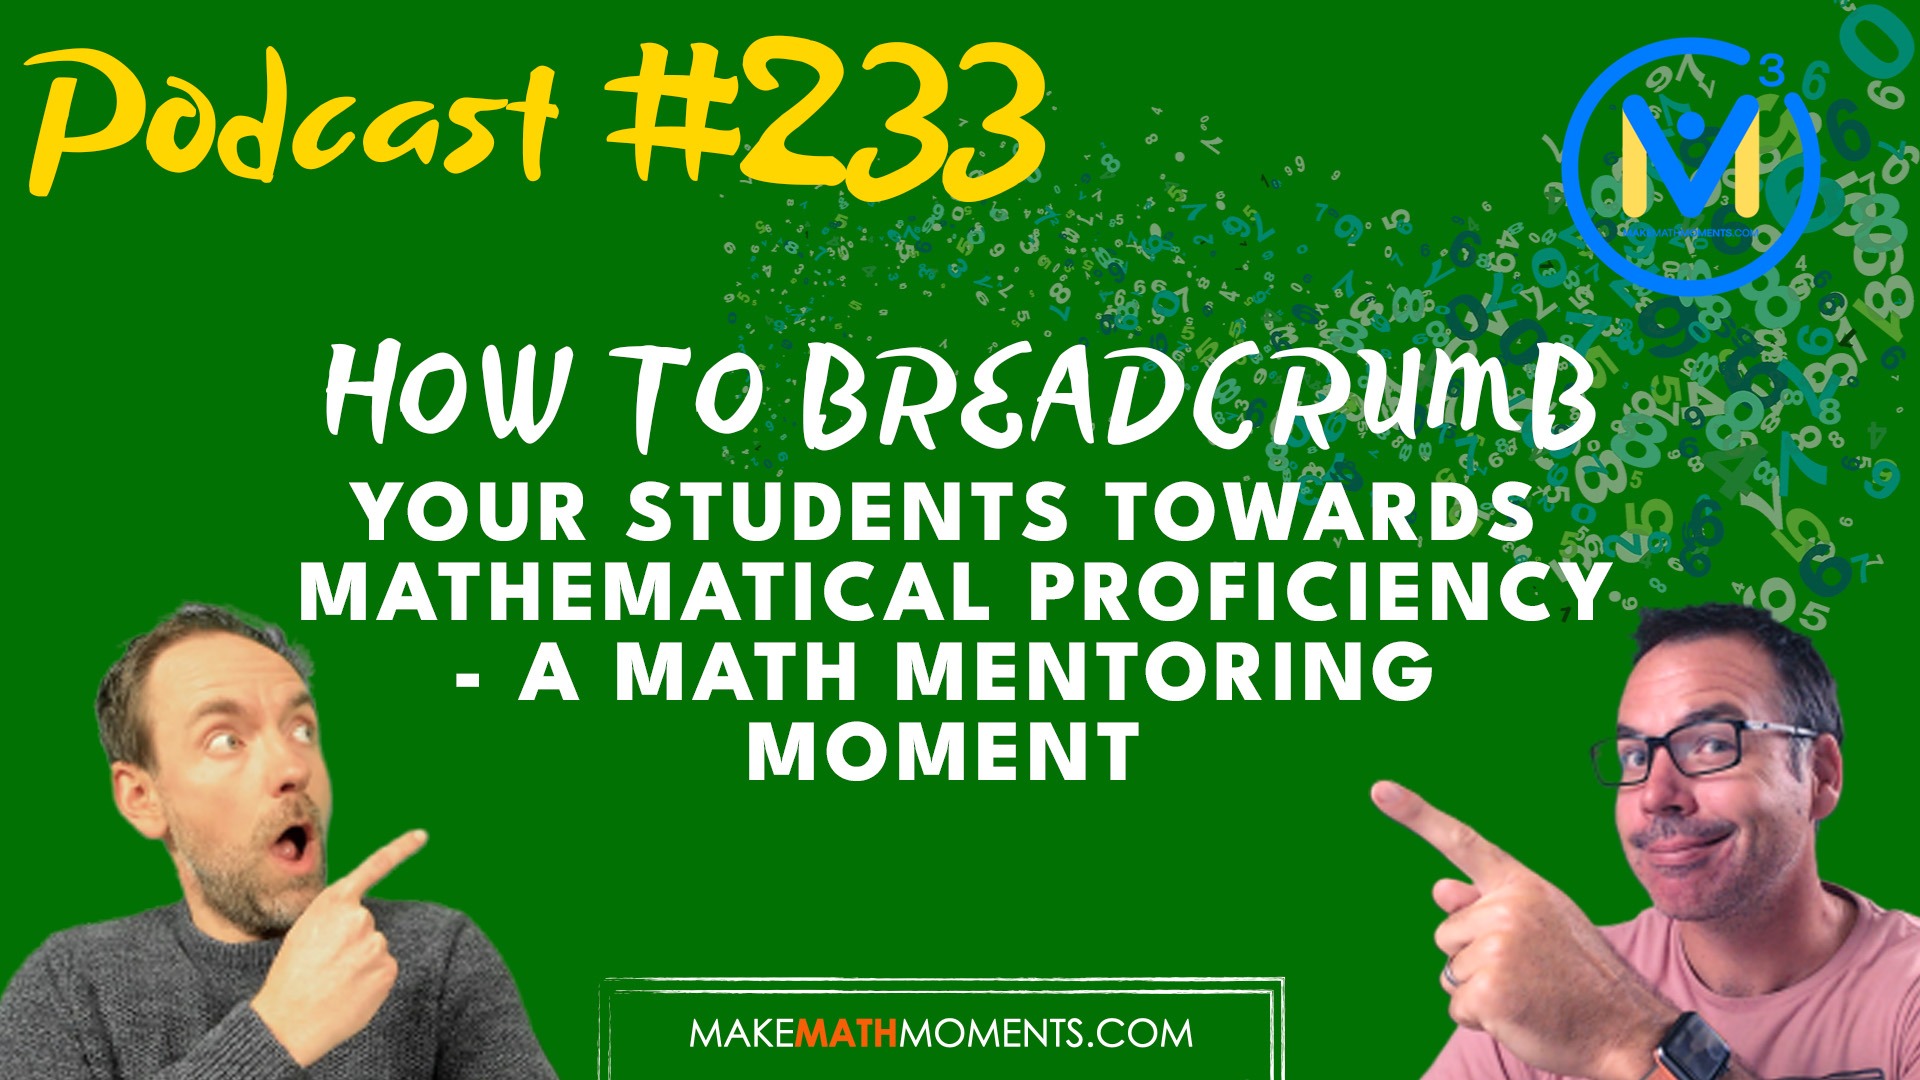 Episode 233: How to Move Beyond Answer Getting. A Math Mentoring Moment (Ep. 38 Replay)